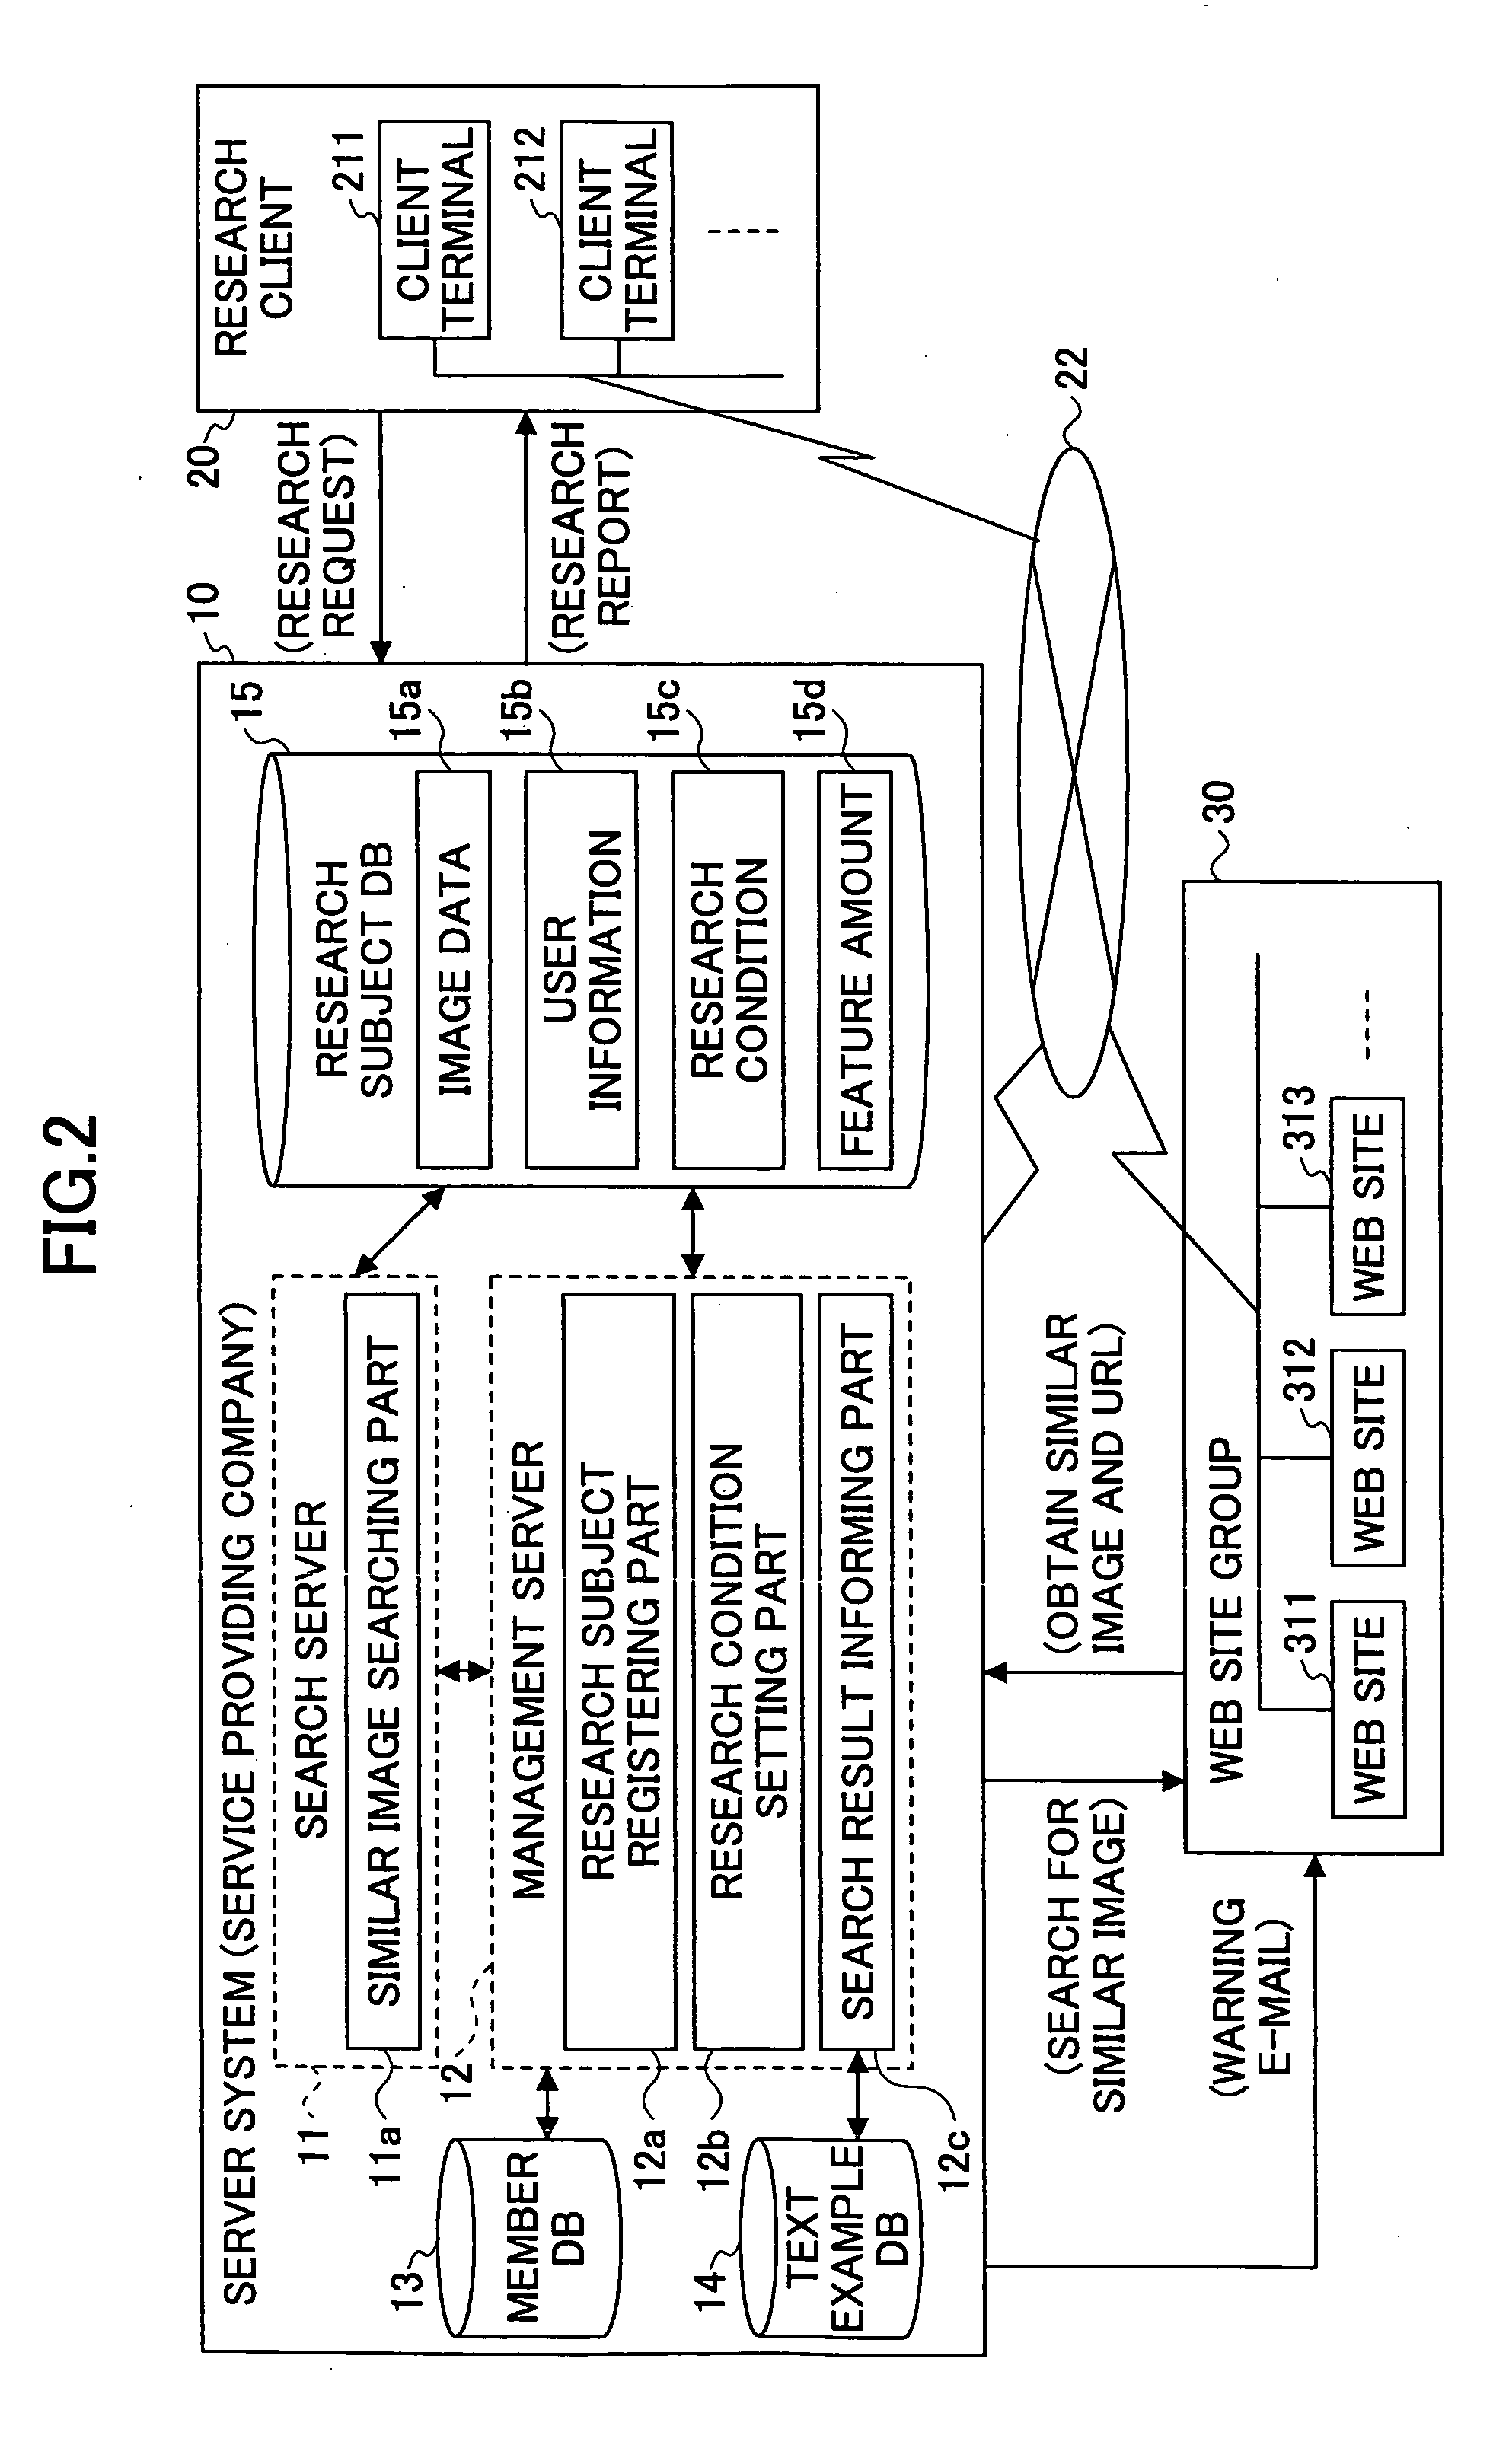 System, apparatus, and method for providing illegal use research service for image data, and system, apparatus, and method for providing proper use research service for image data